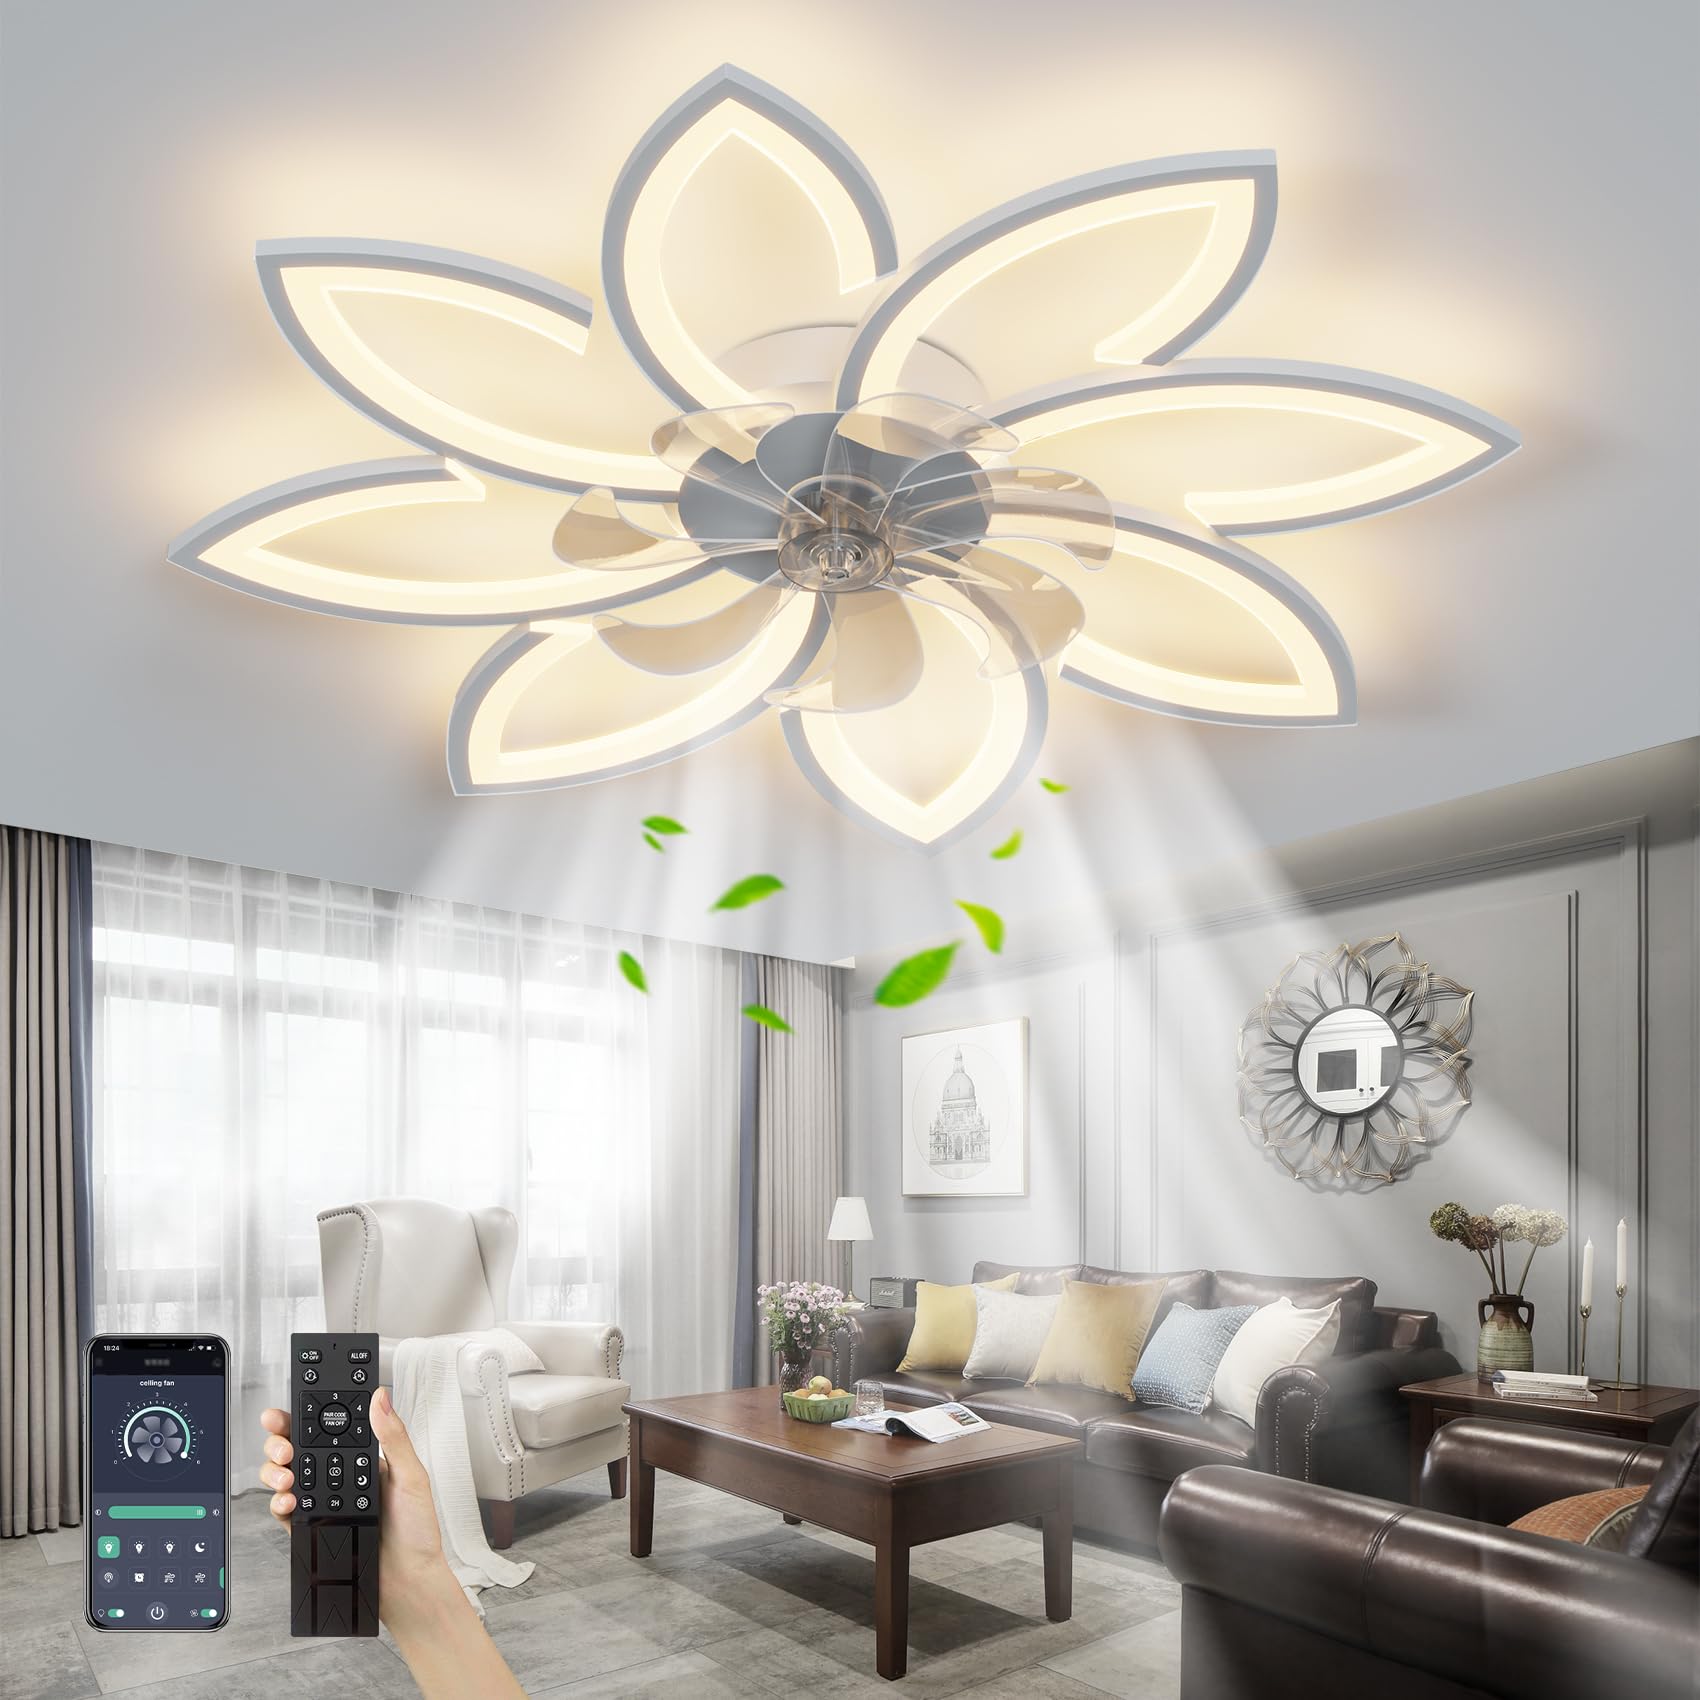 SPEVCH 35" Ceiling Fans with Lights Remote Control